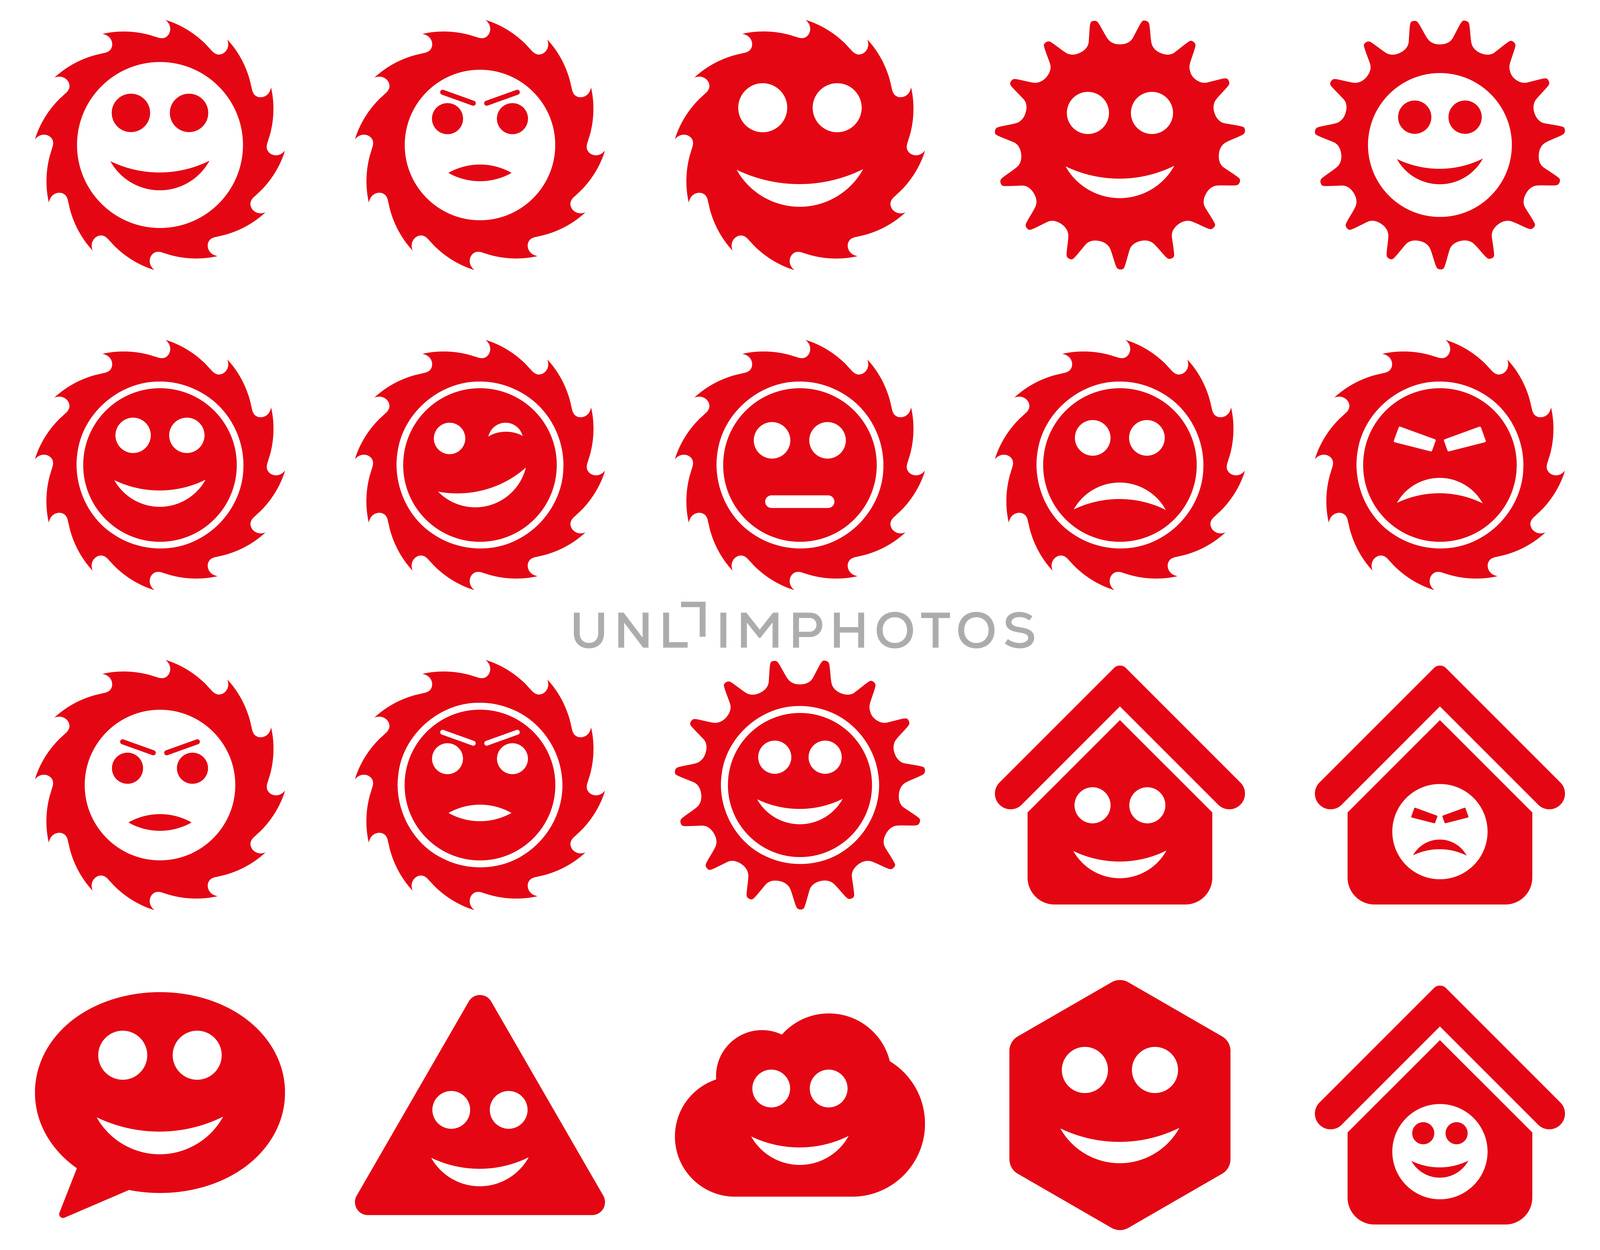 Tools, gears, smiles, emotions icons. Glyph set style is flat images, red symbols, isolated on a white background.